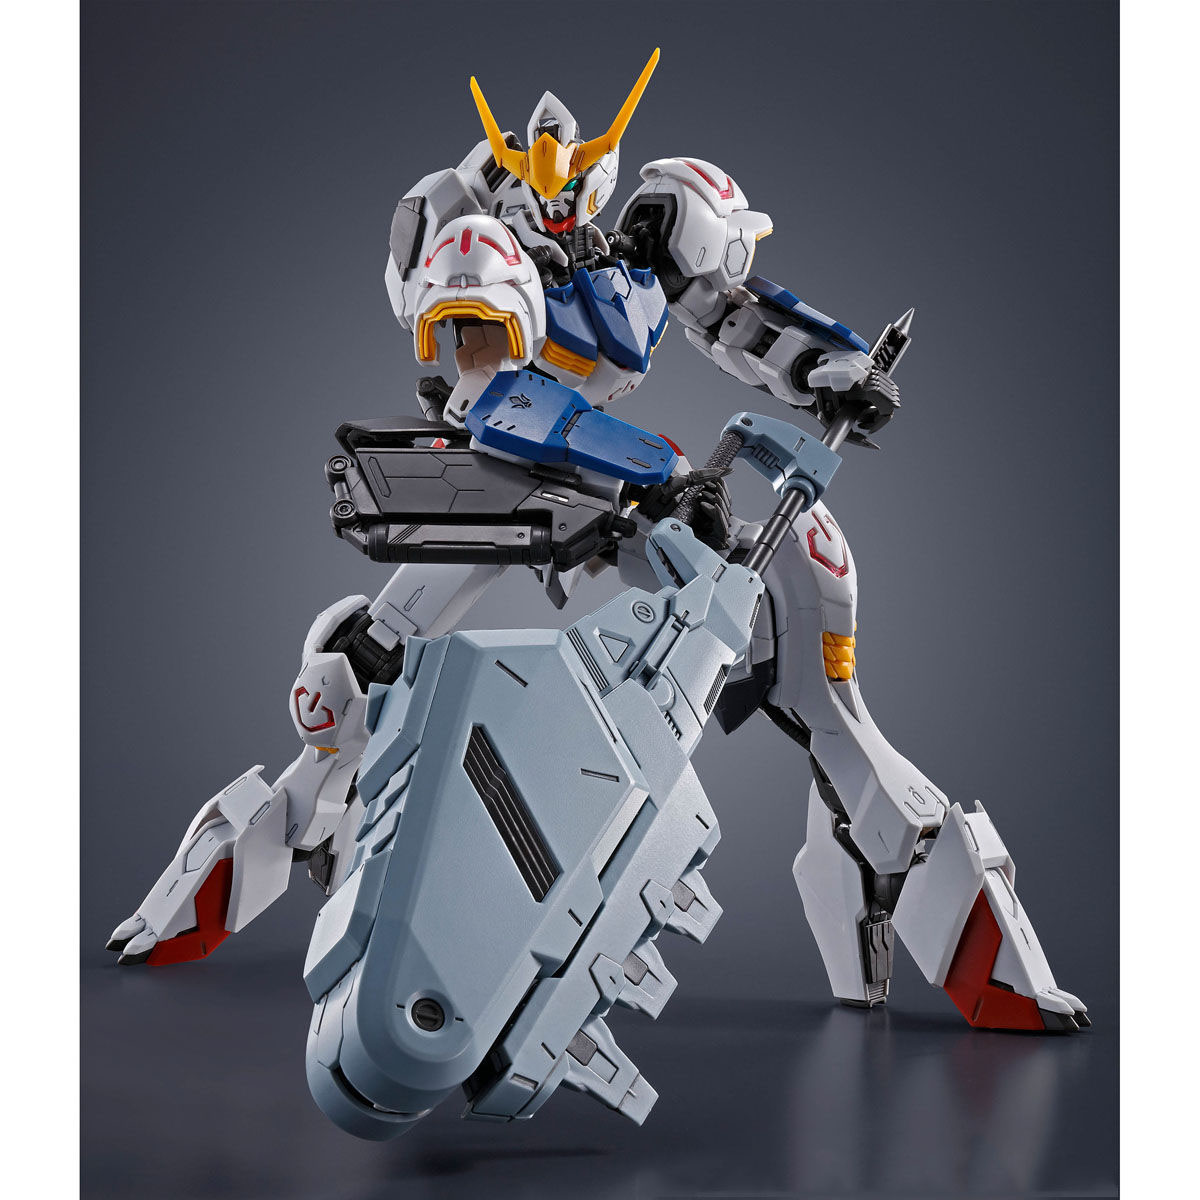 MG 1/100 EXPANSION PARTS SET for GUNDAM BARBATOS  [Mar 2022 Delivery]